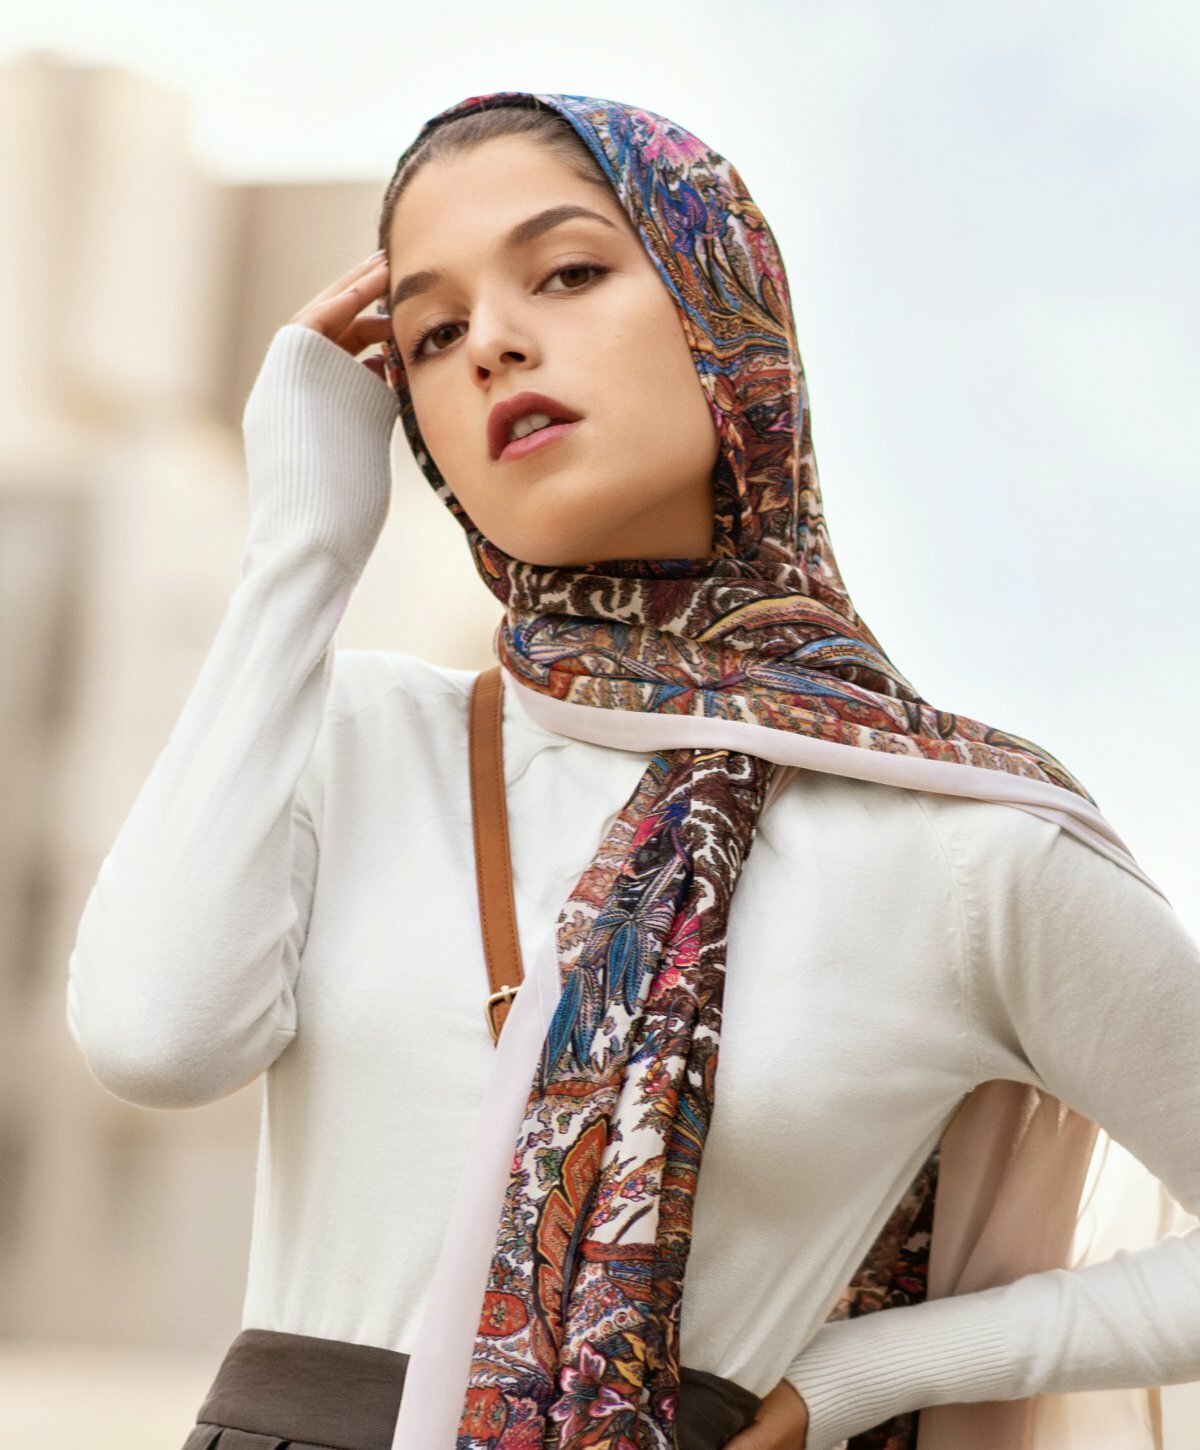 New York City Juvederm model with a scarf